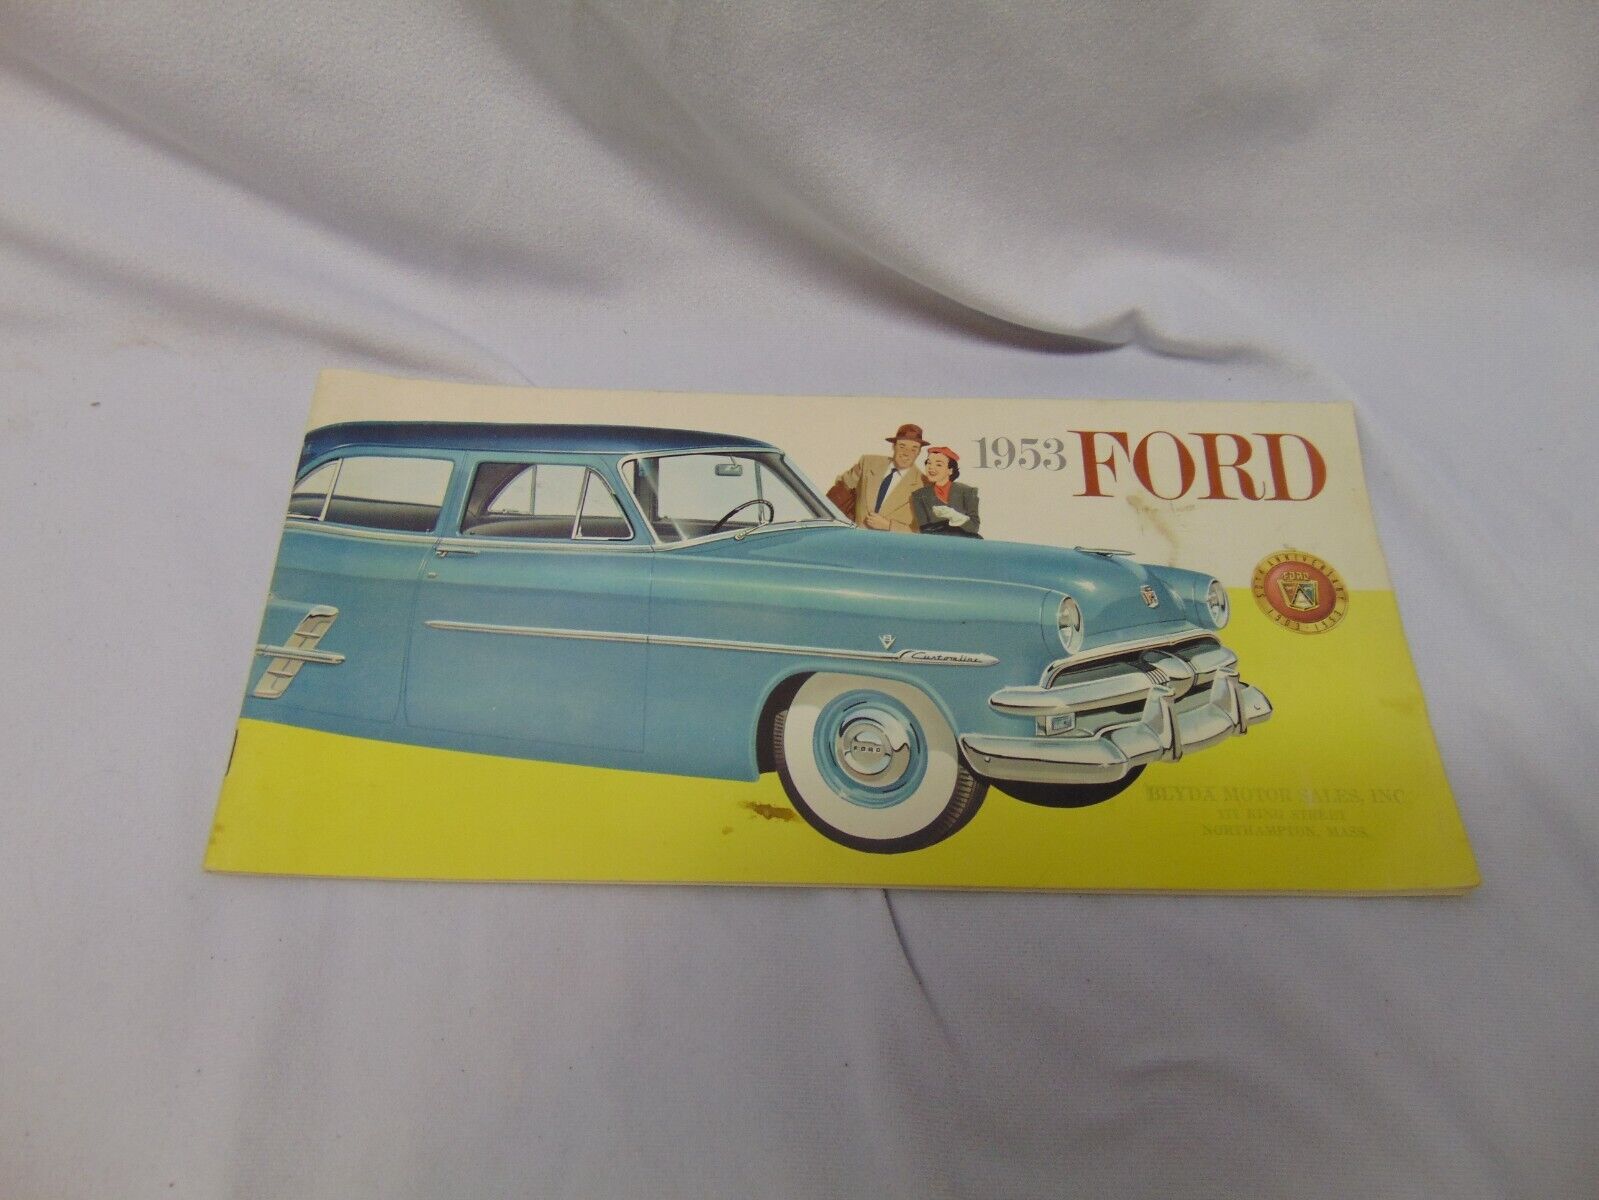 1953 Ford 50th Anniversary Motor Sales Book #7391 in color coupe wagon sedan